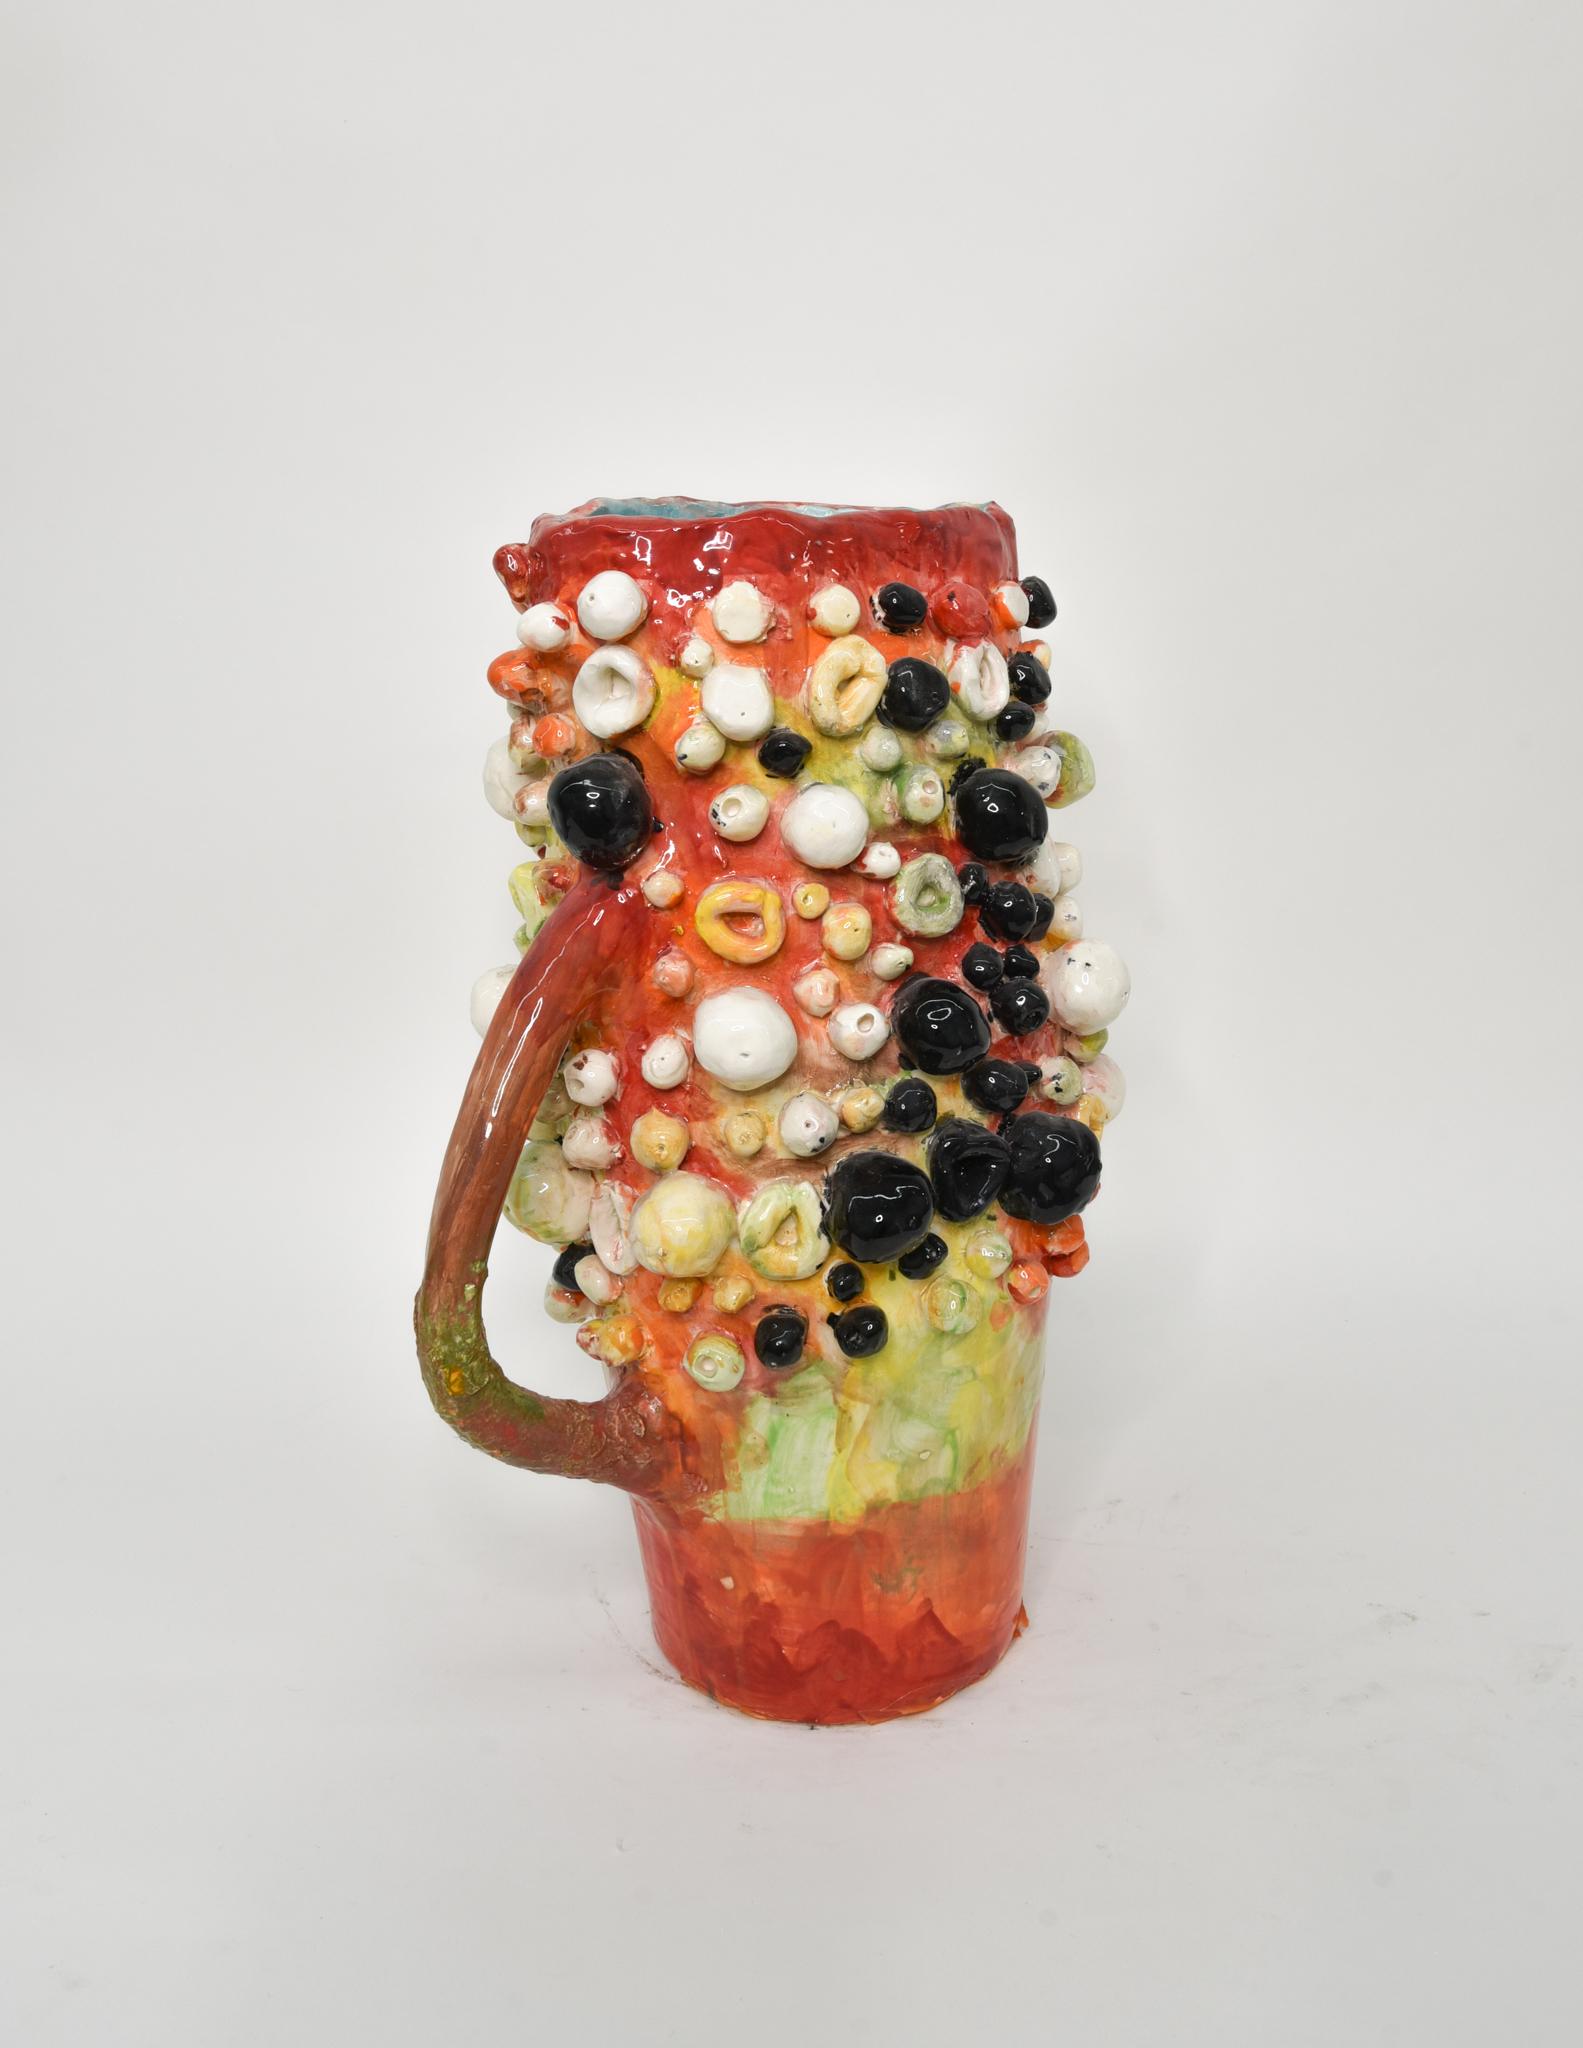 Untitled XXI. Glazed ceramic abstract jar sculpture - Sculpture by Charo Oquet